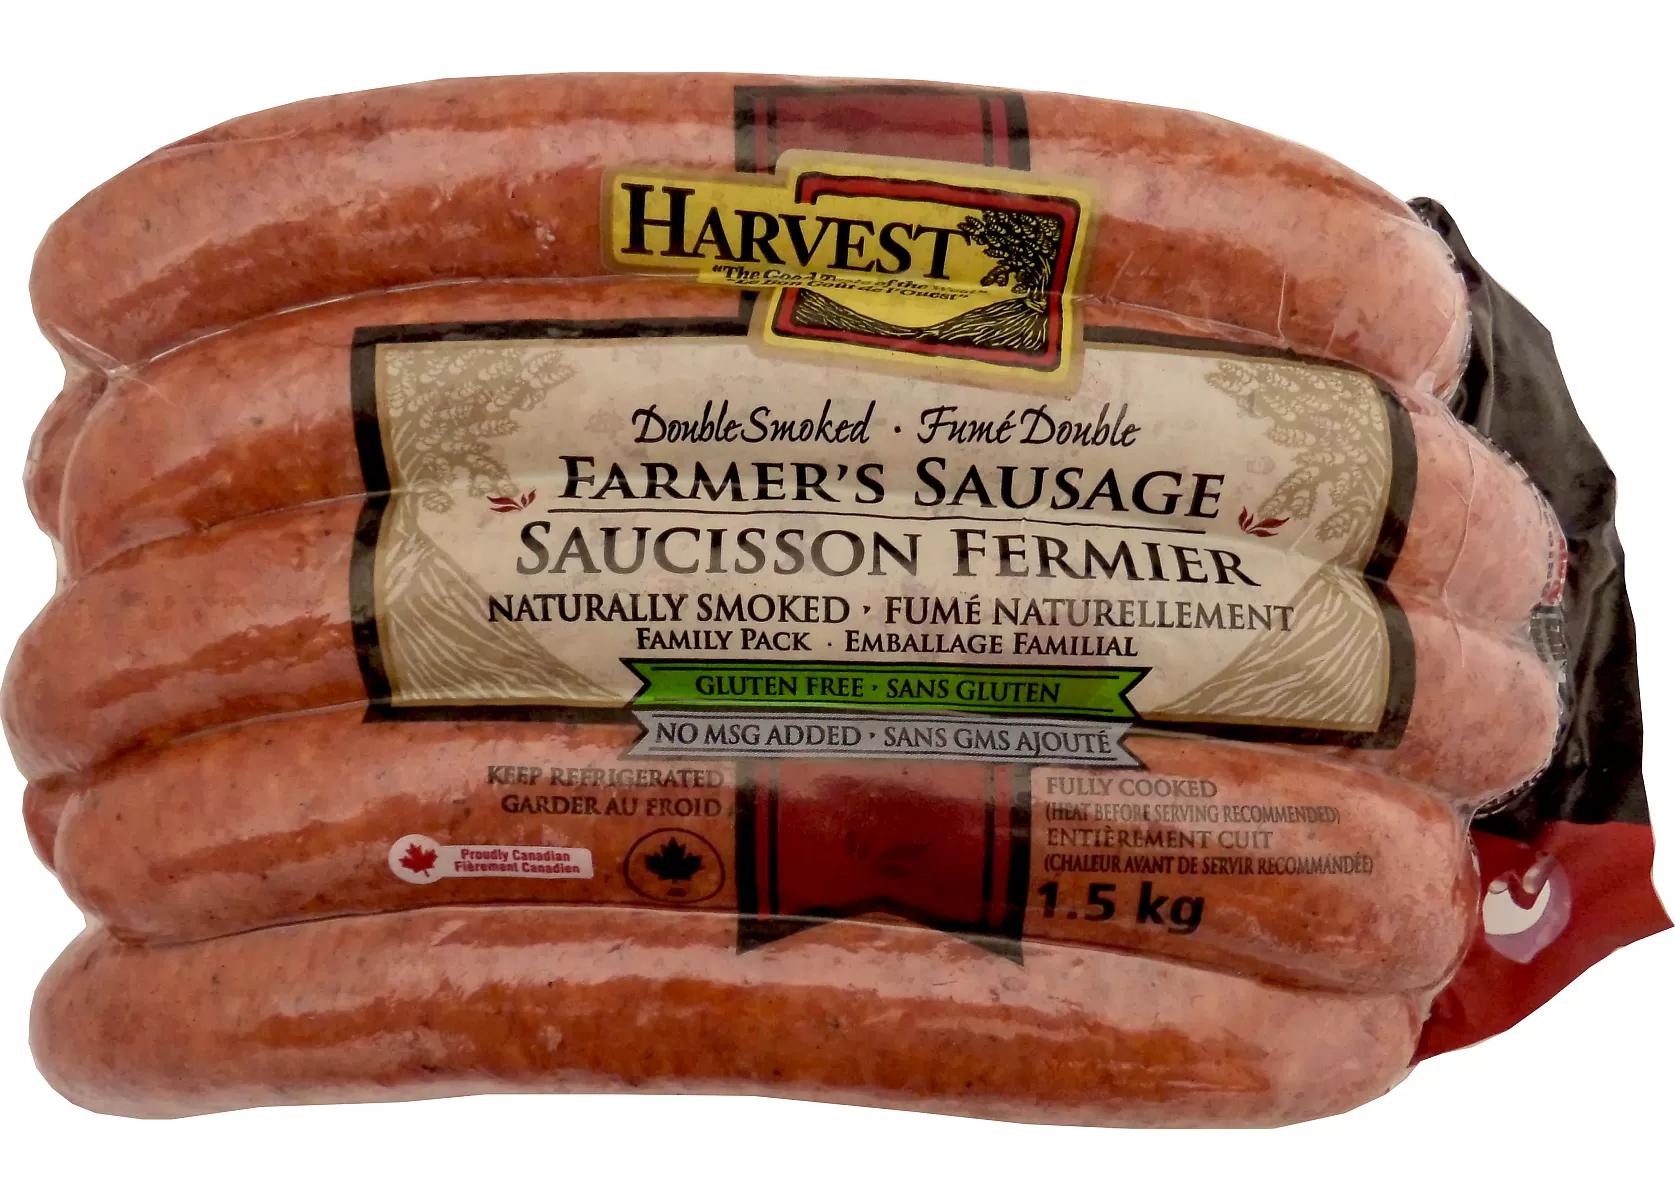 smoked farmers sausage - What is farmers sausage made of